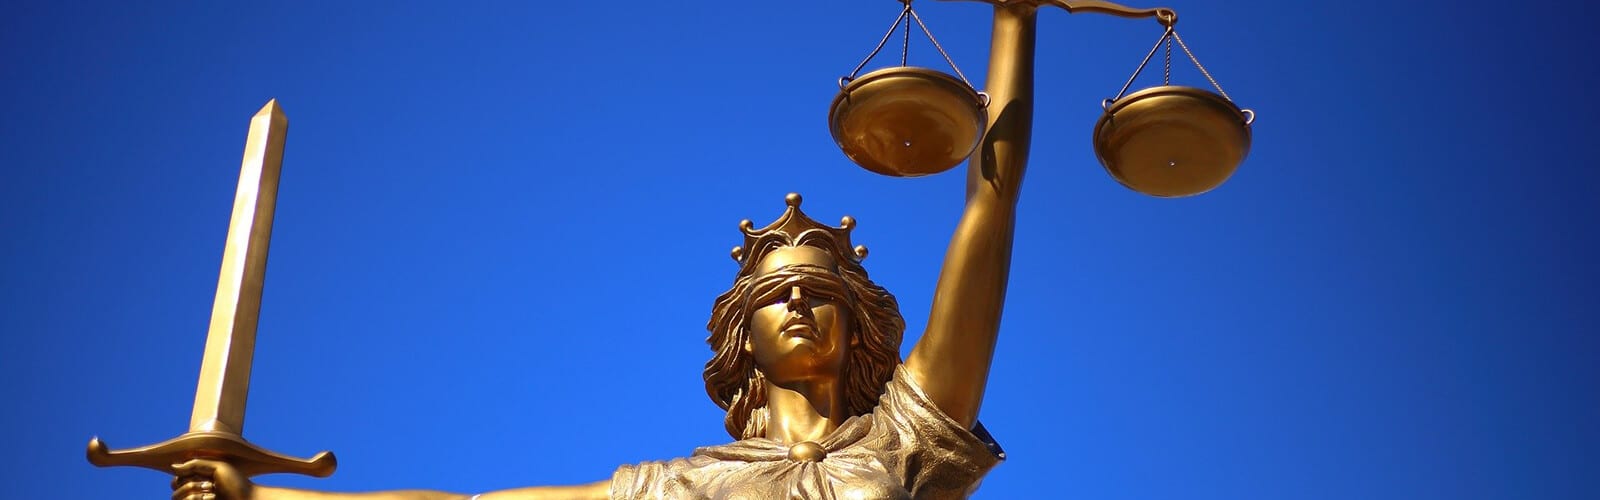 Image of Blind Justice Statue - blindfolded woman wearing crown, sword in one hand, scale in the other.